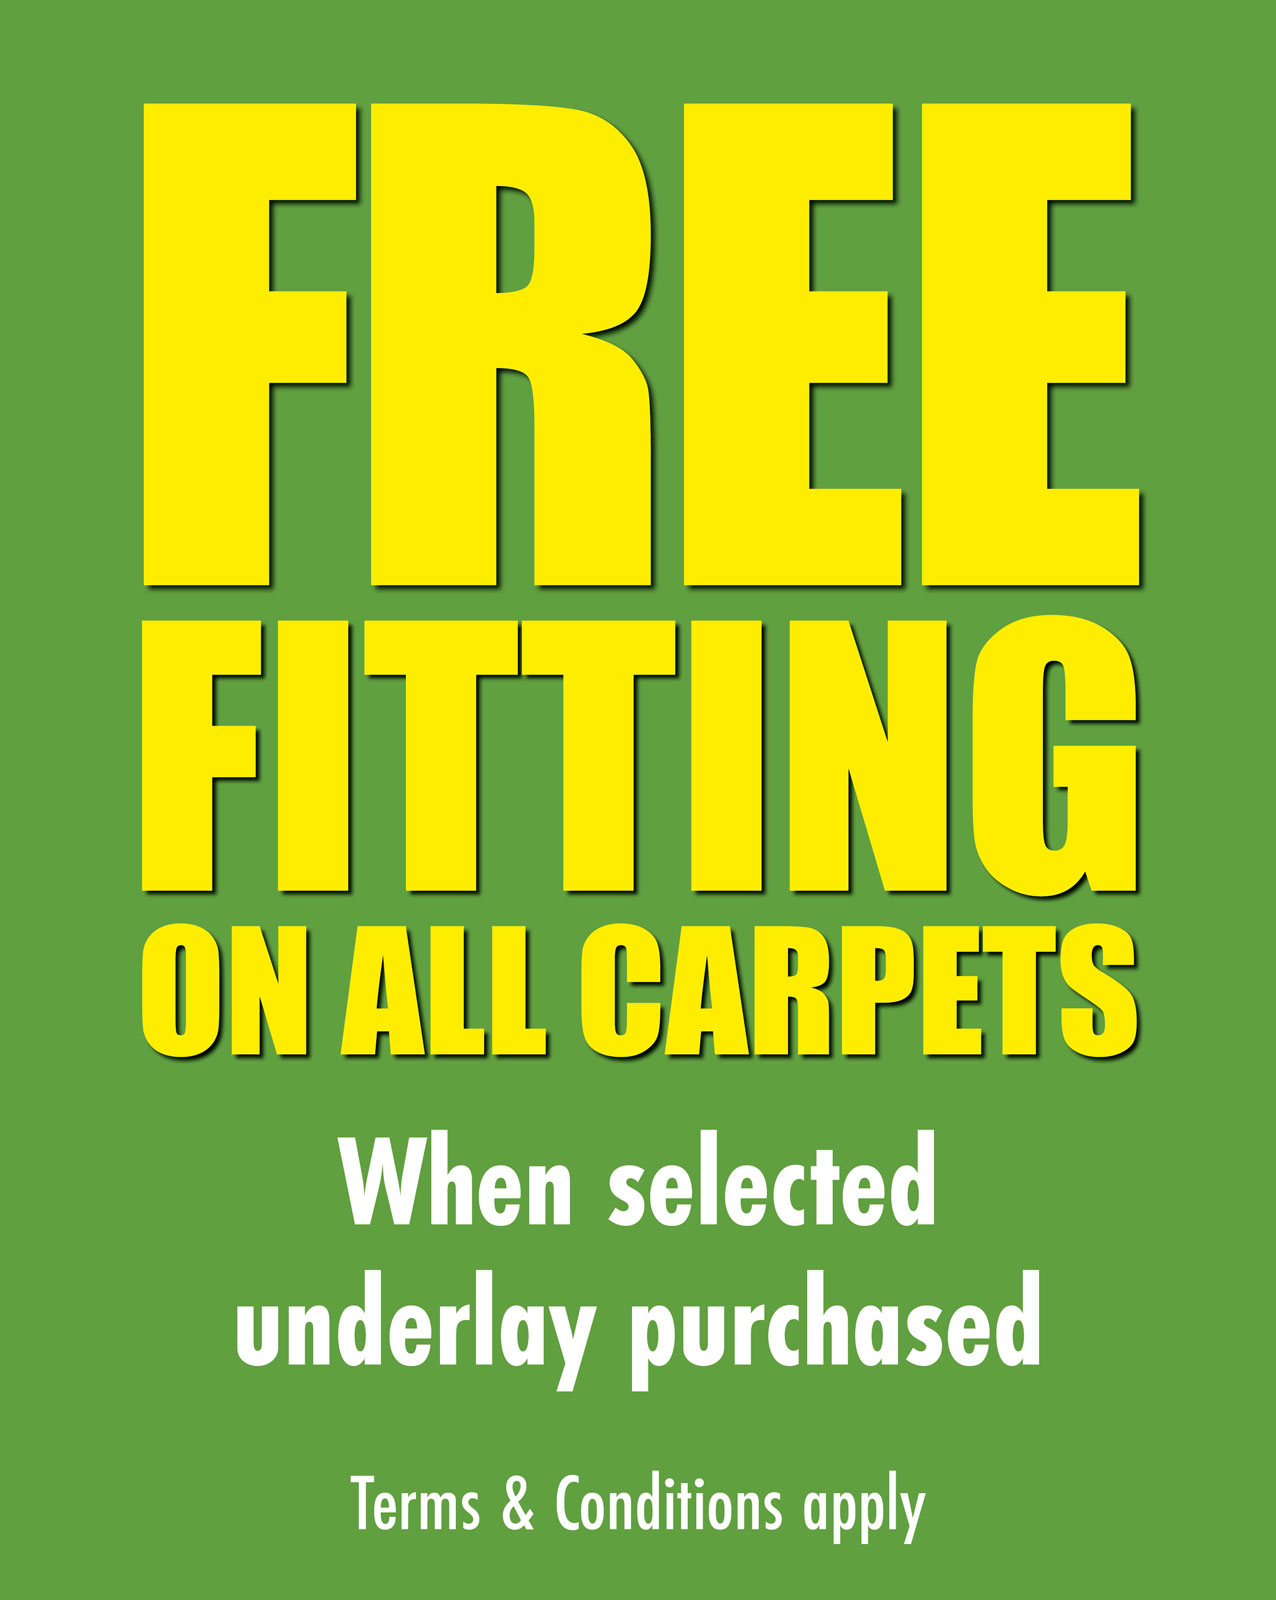 Free Fitting on all Carpets*